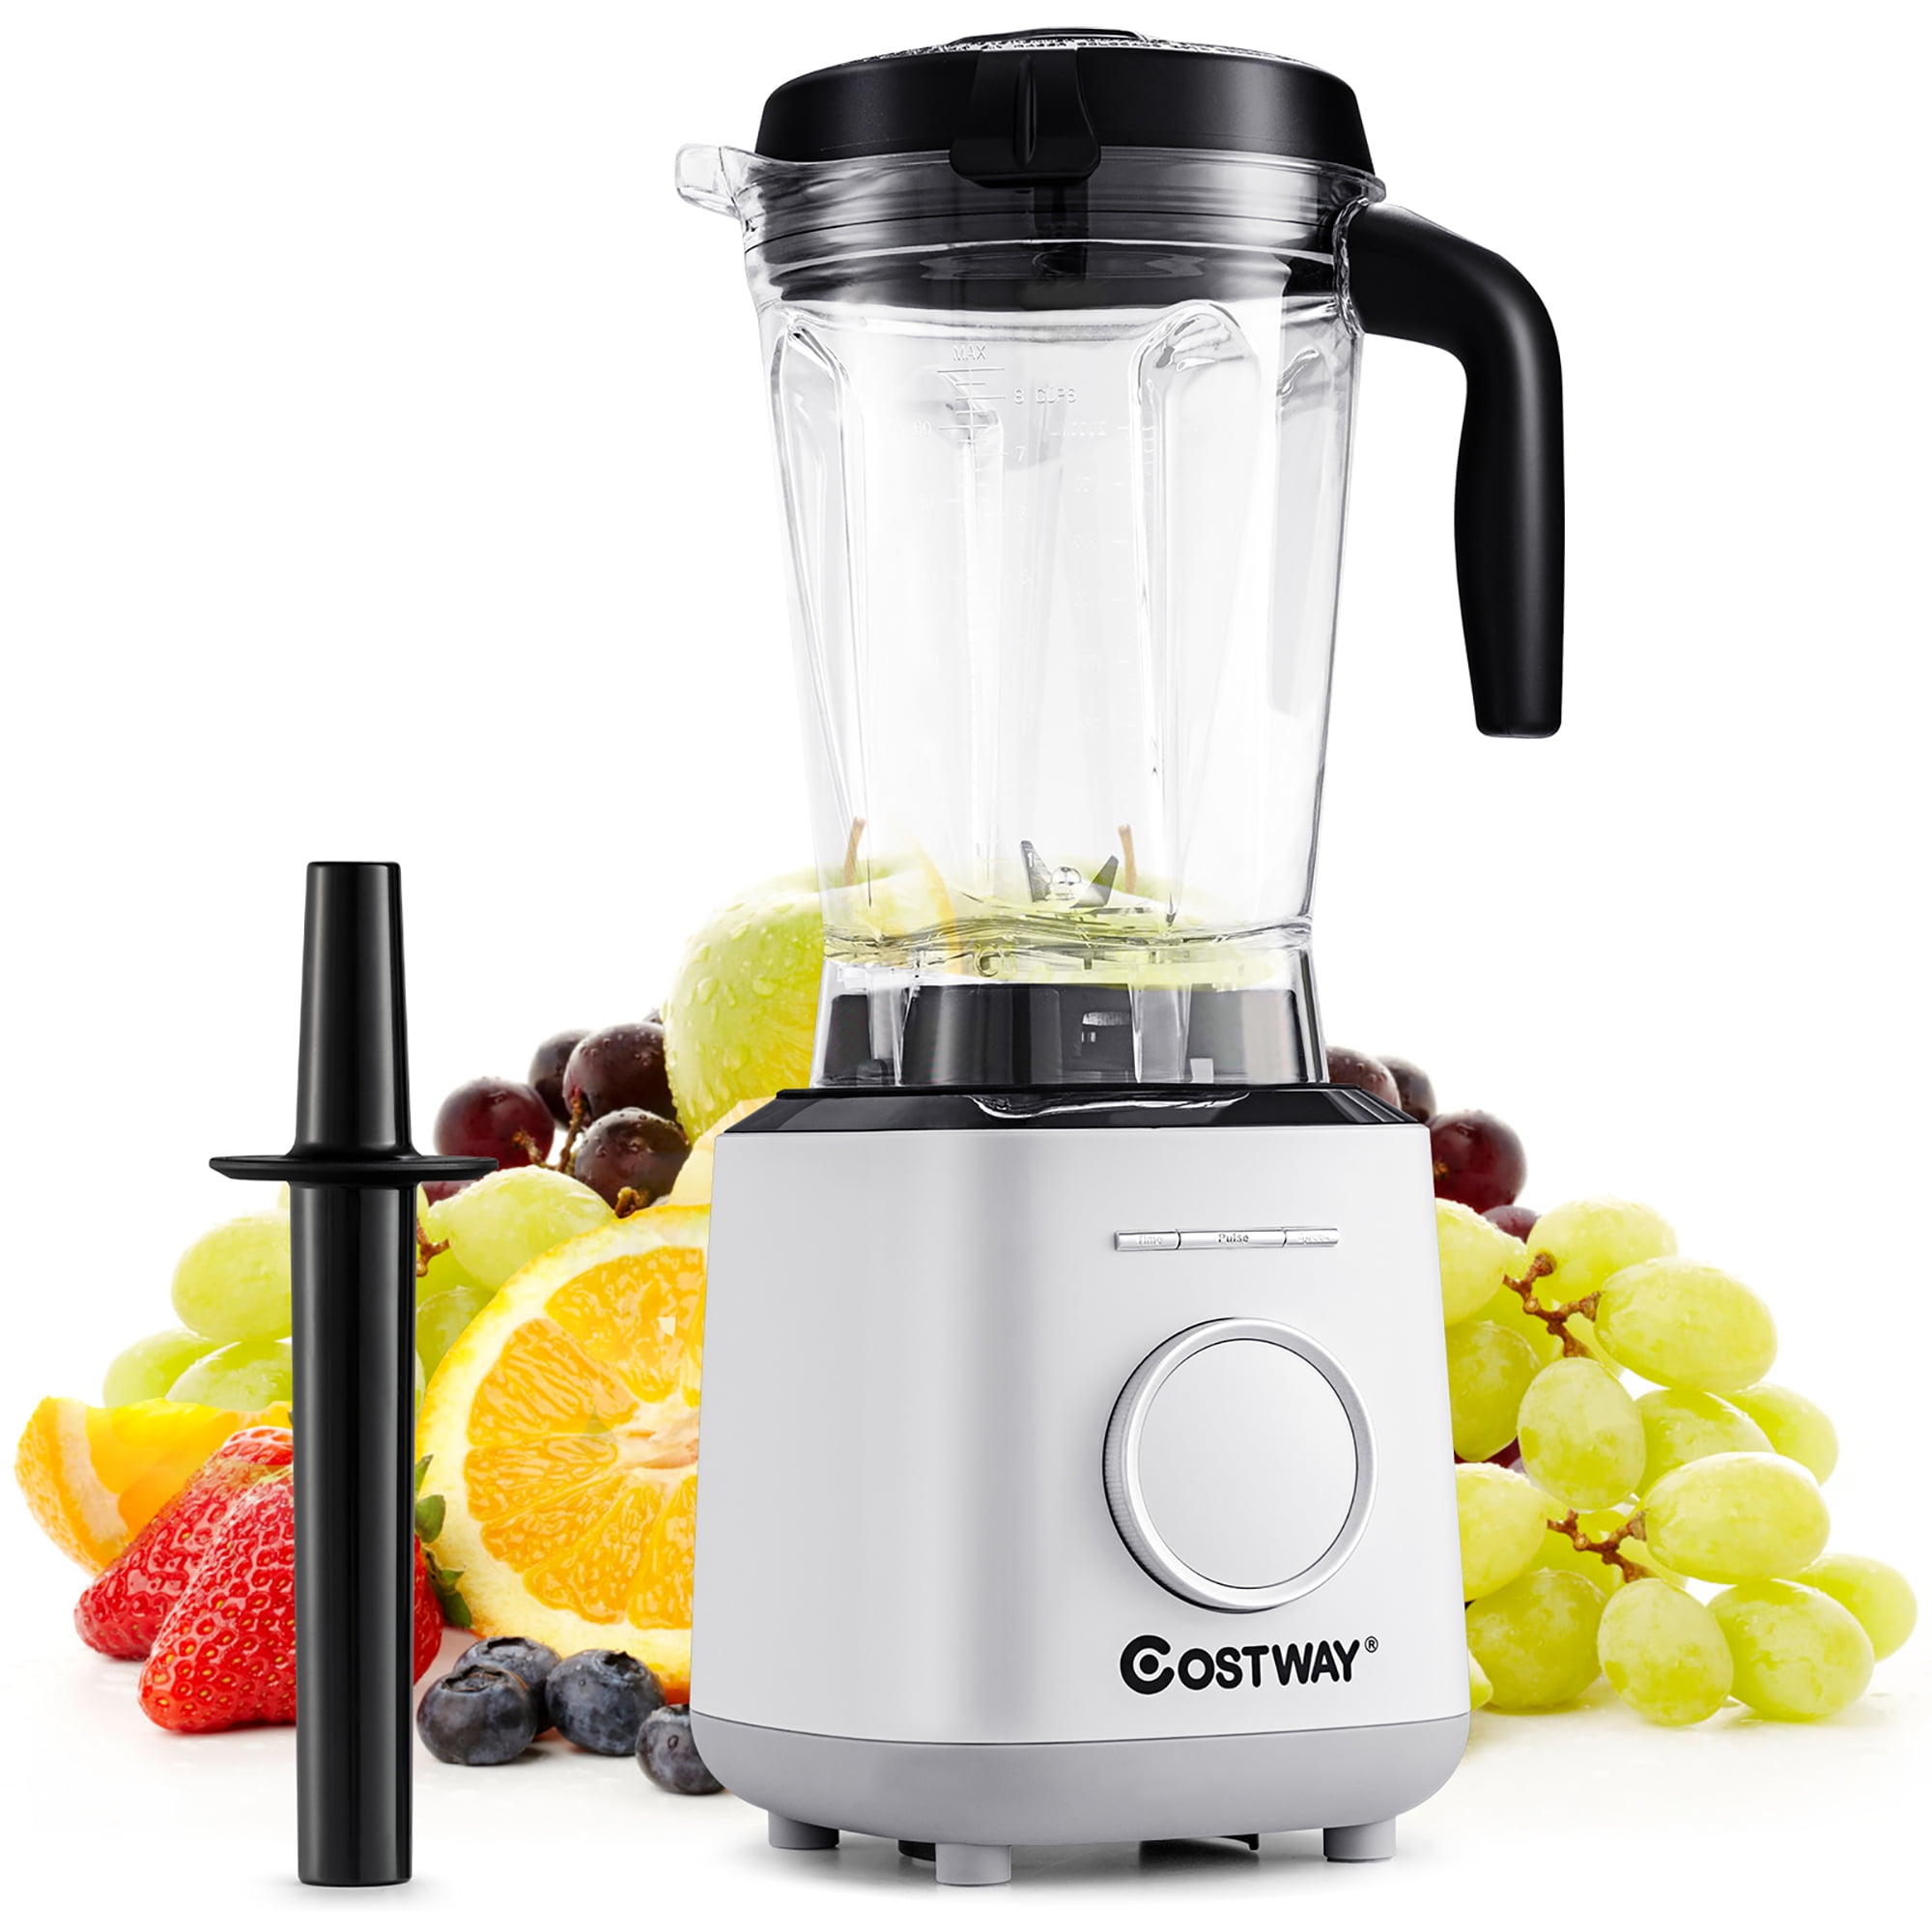 Link Power Blender 1500W For Shakes, Smoothies & More 50 oz Capacity -  Great For Home, Dorms and Office - Green